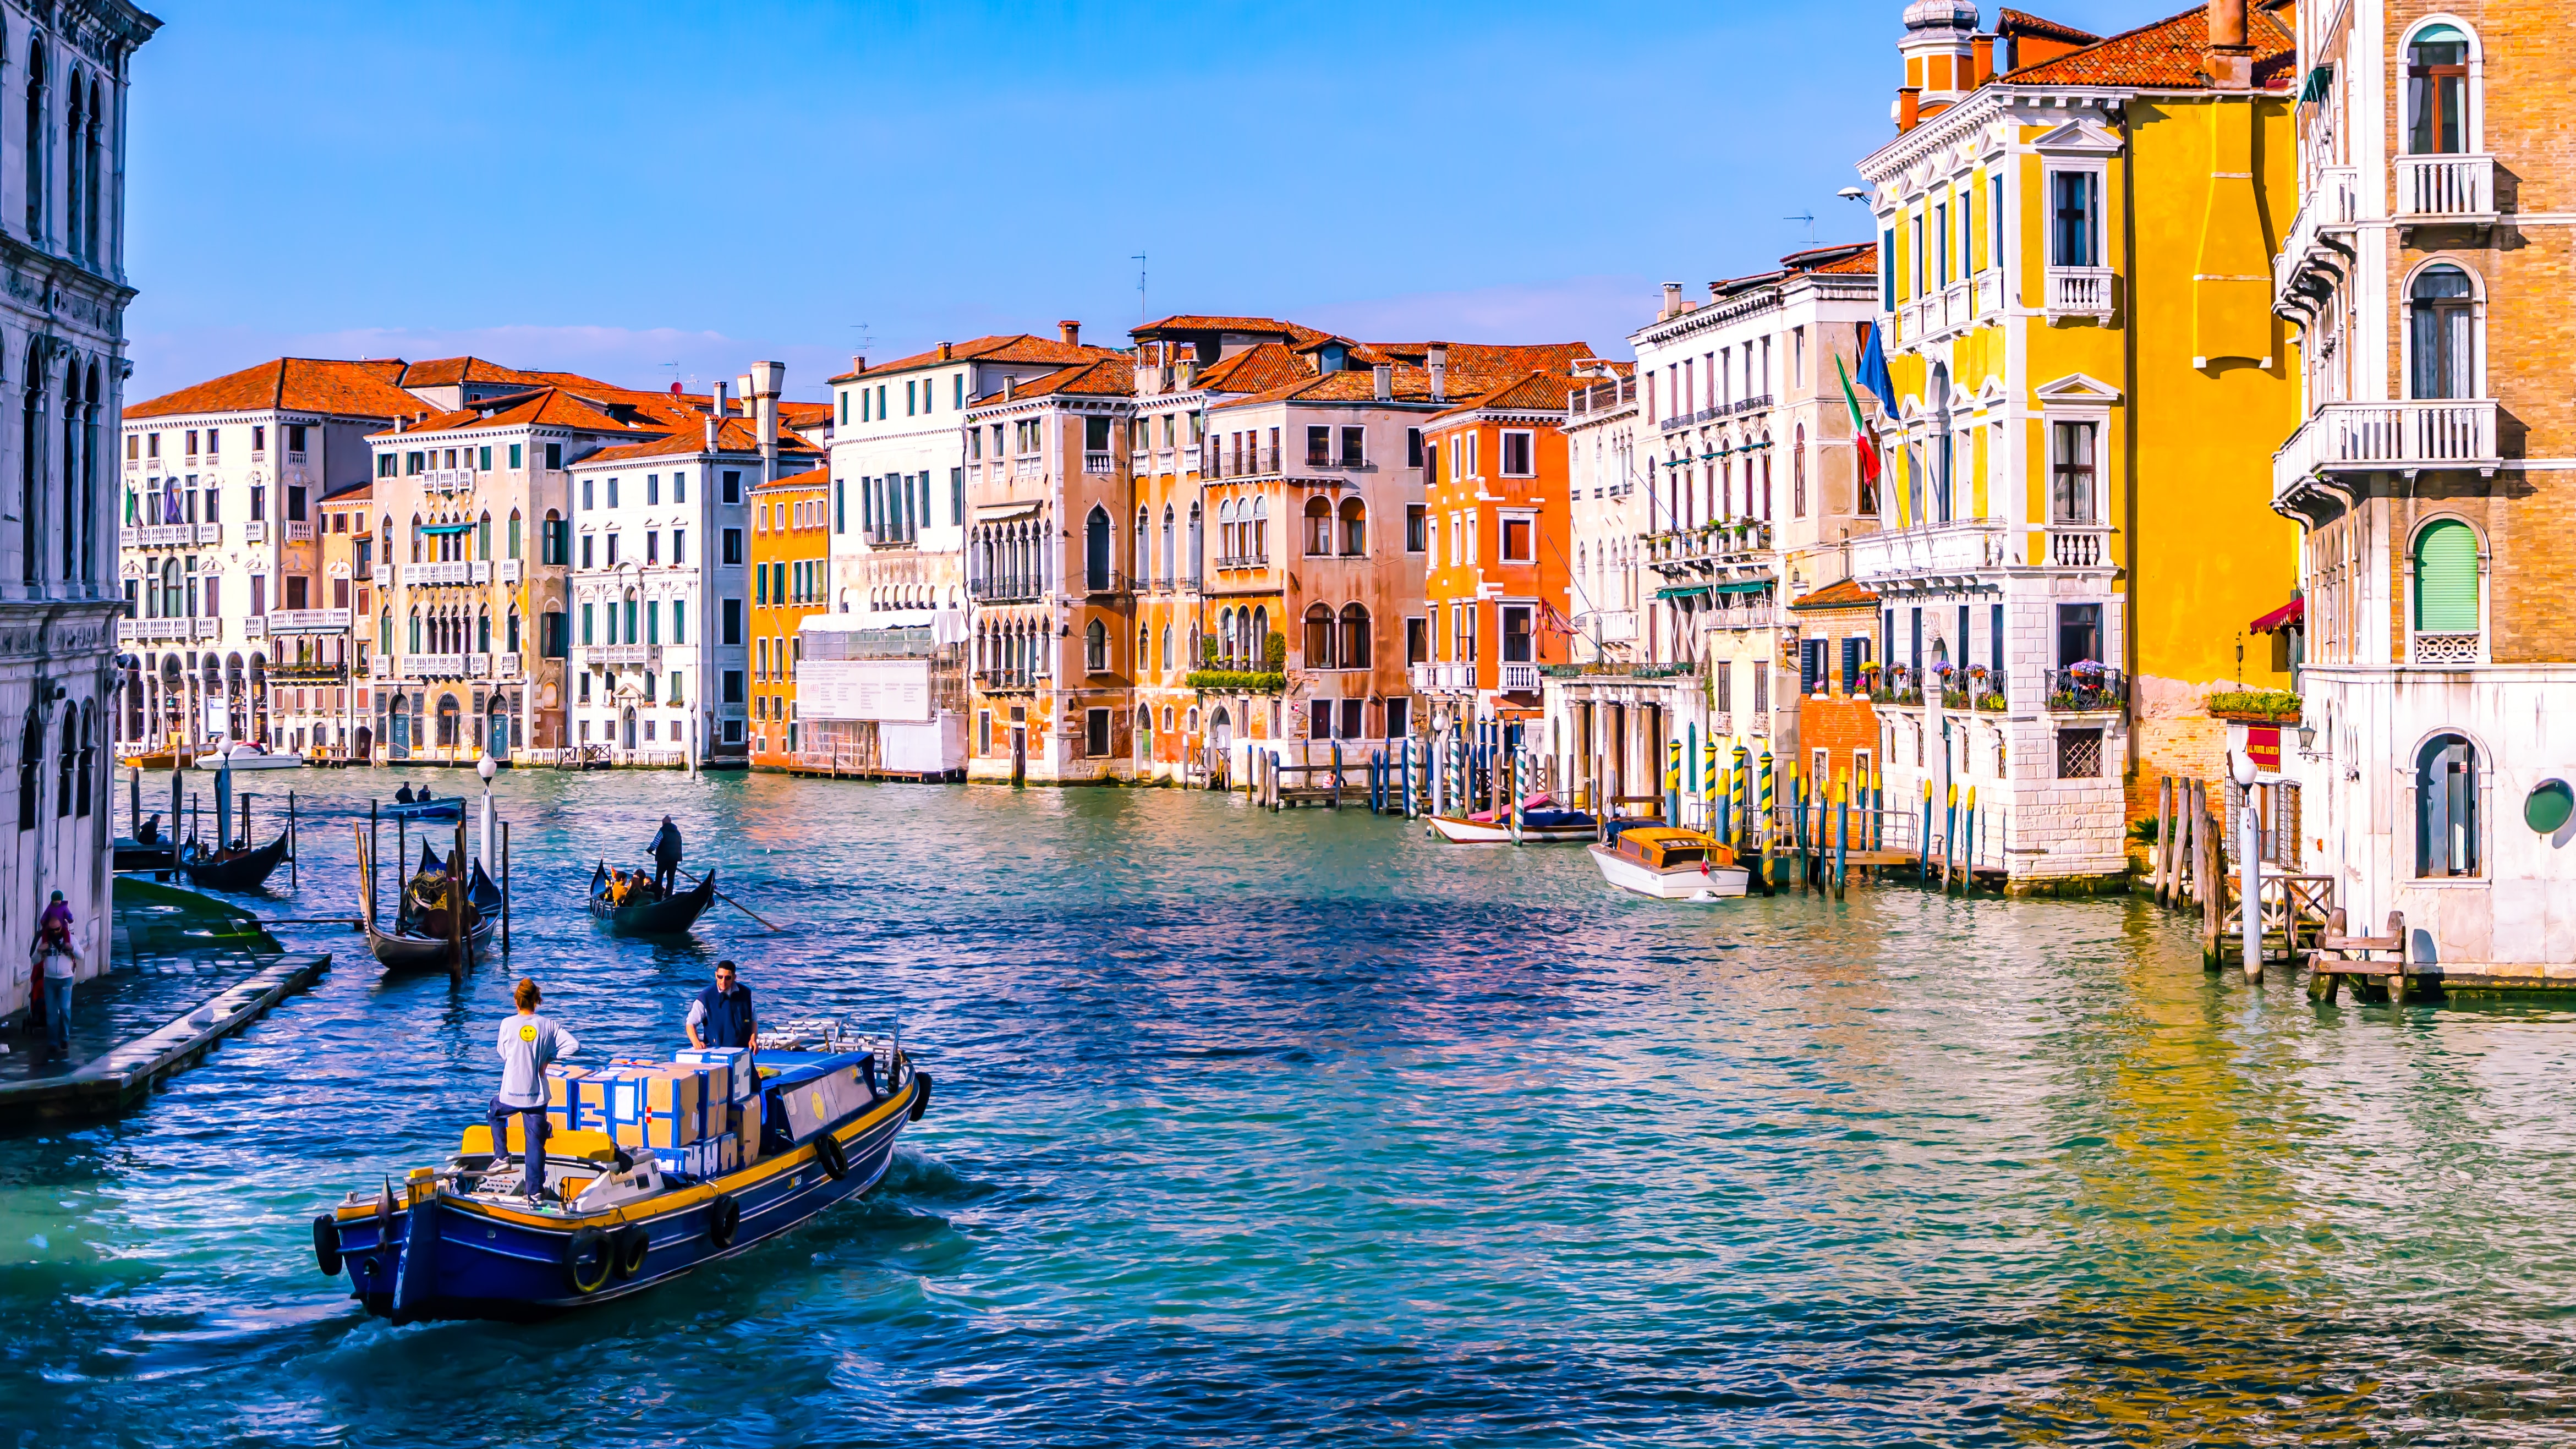 Image of Venice by Kit Suman